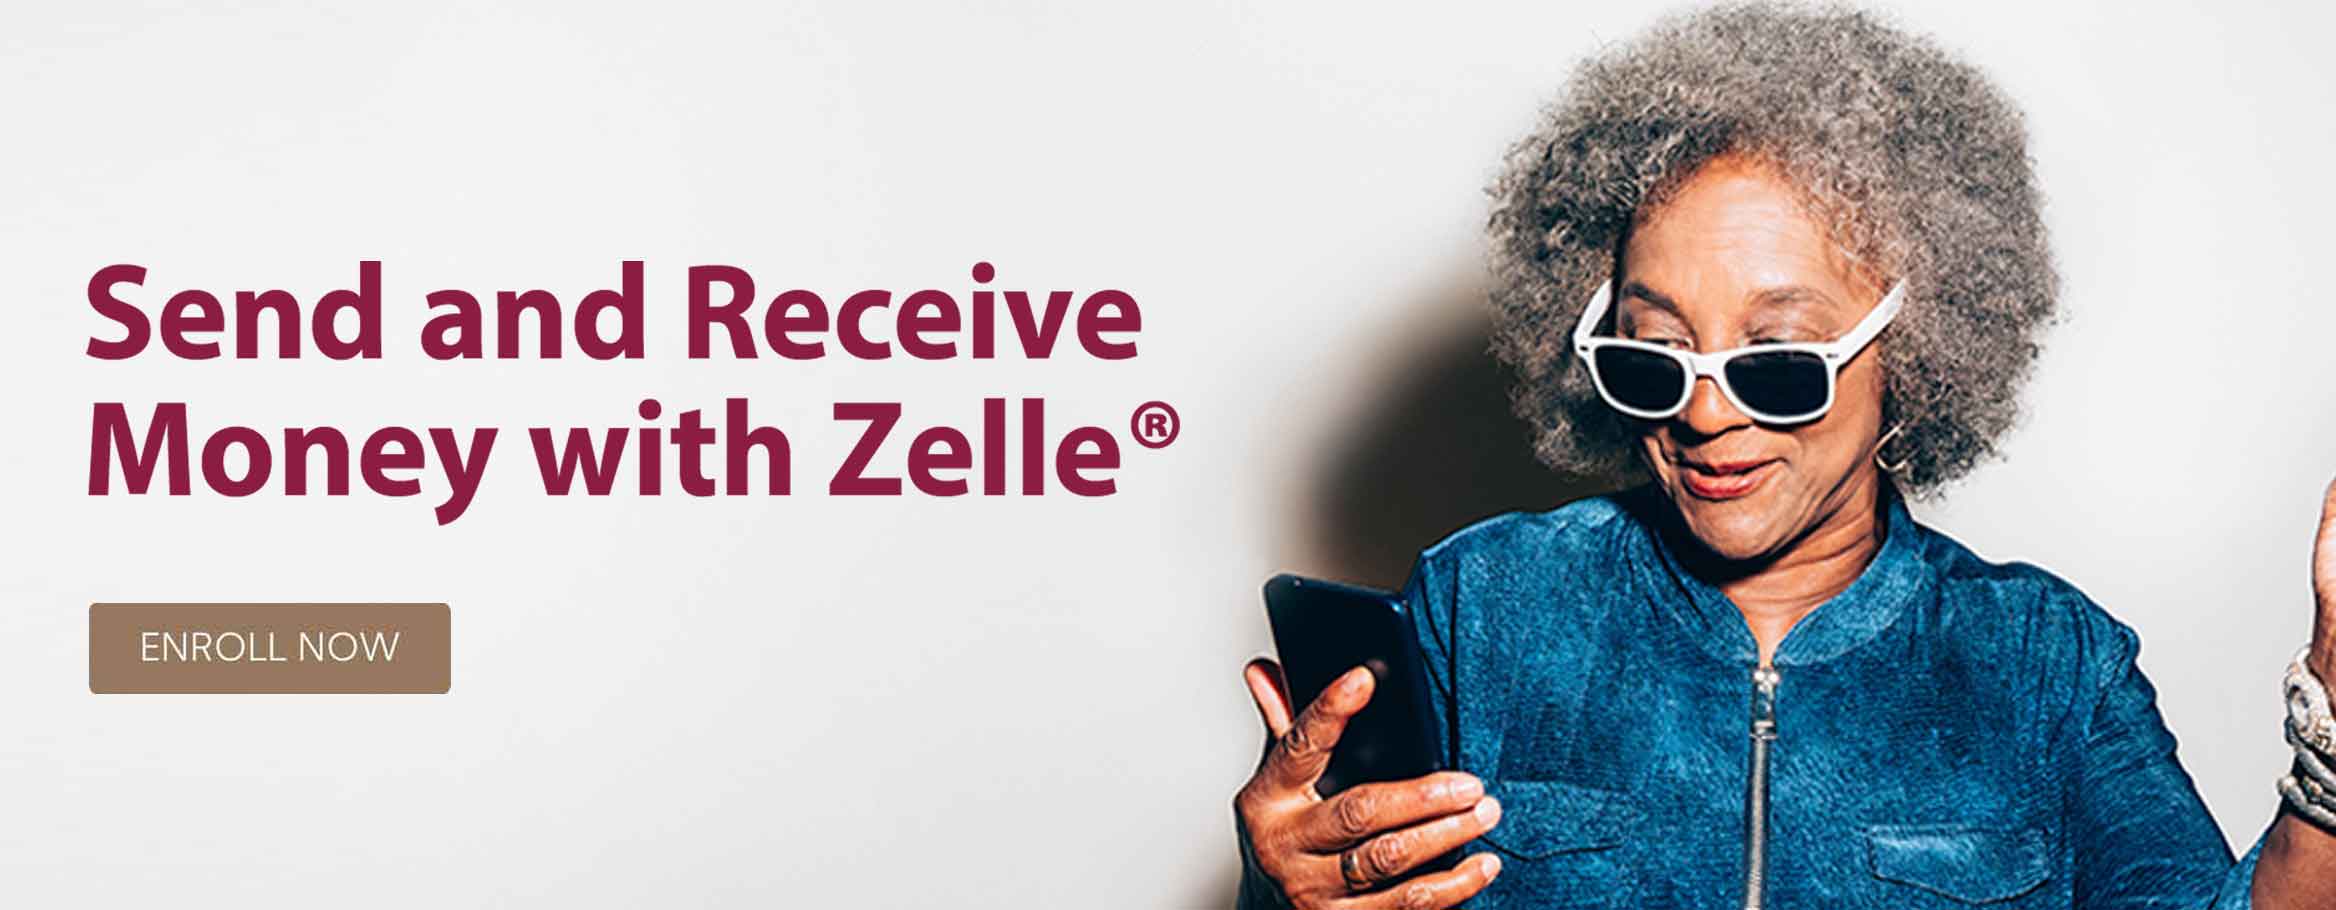 Send and receive money with Zelle, woman using app on her phone